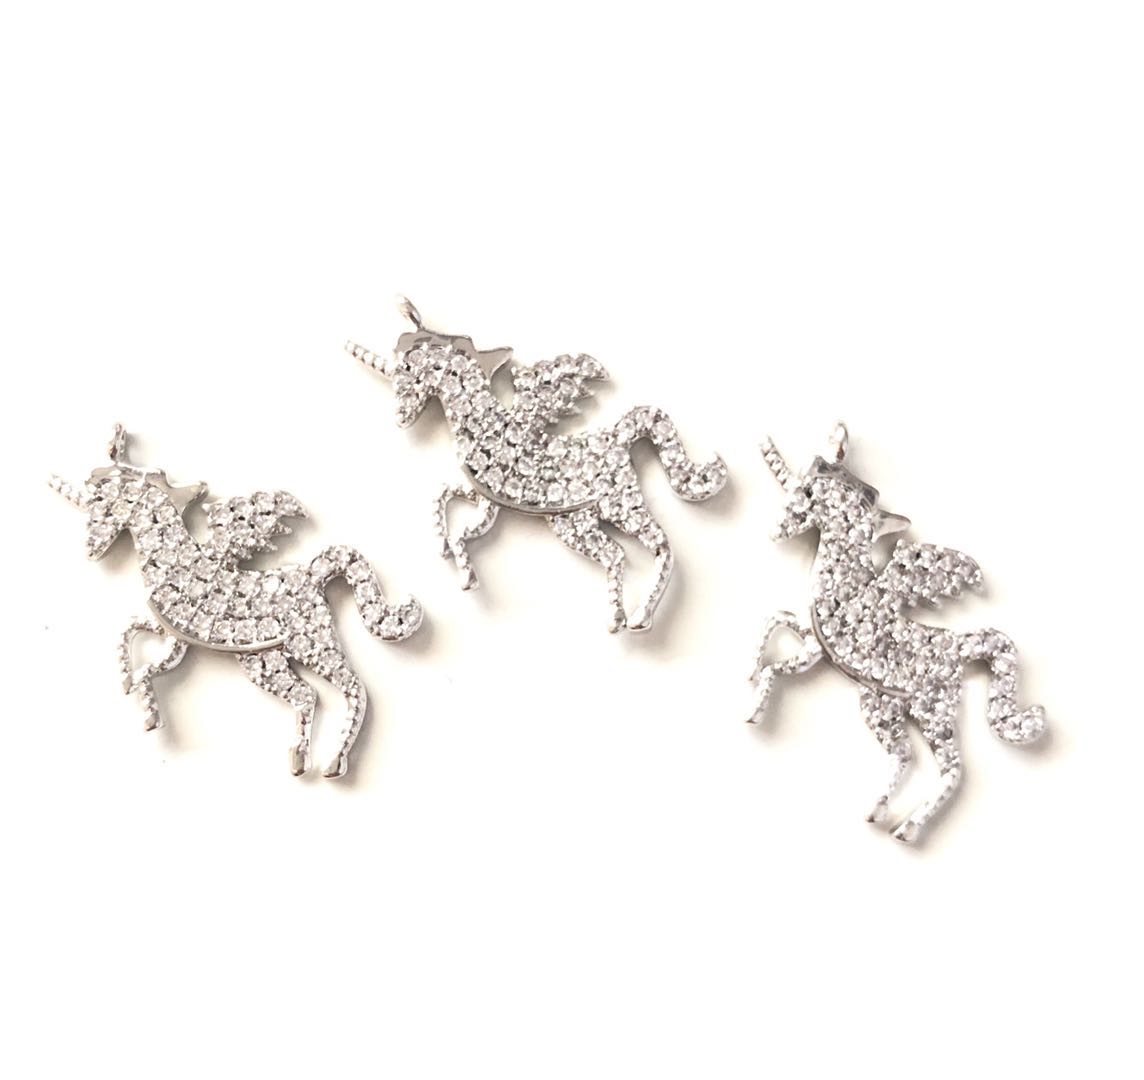 10pcs/lot 20.8*26.4mm CZ Paved Unicorn Charms Silver CZ Paved Charms Animals & Insects On Sale Charms Beads Beyond